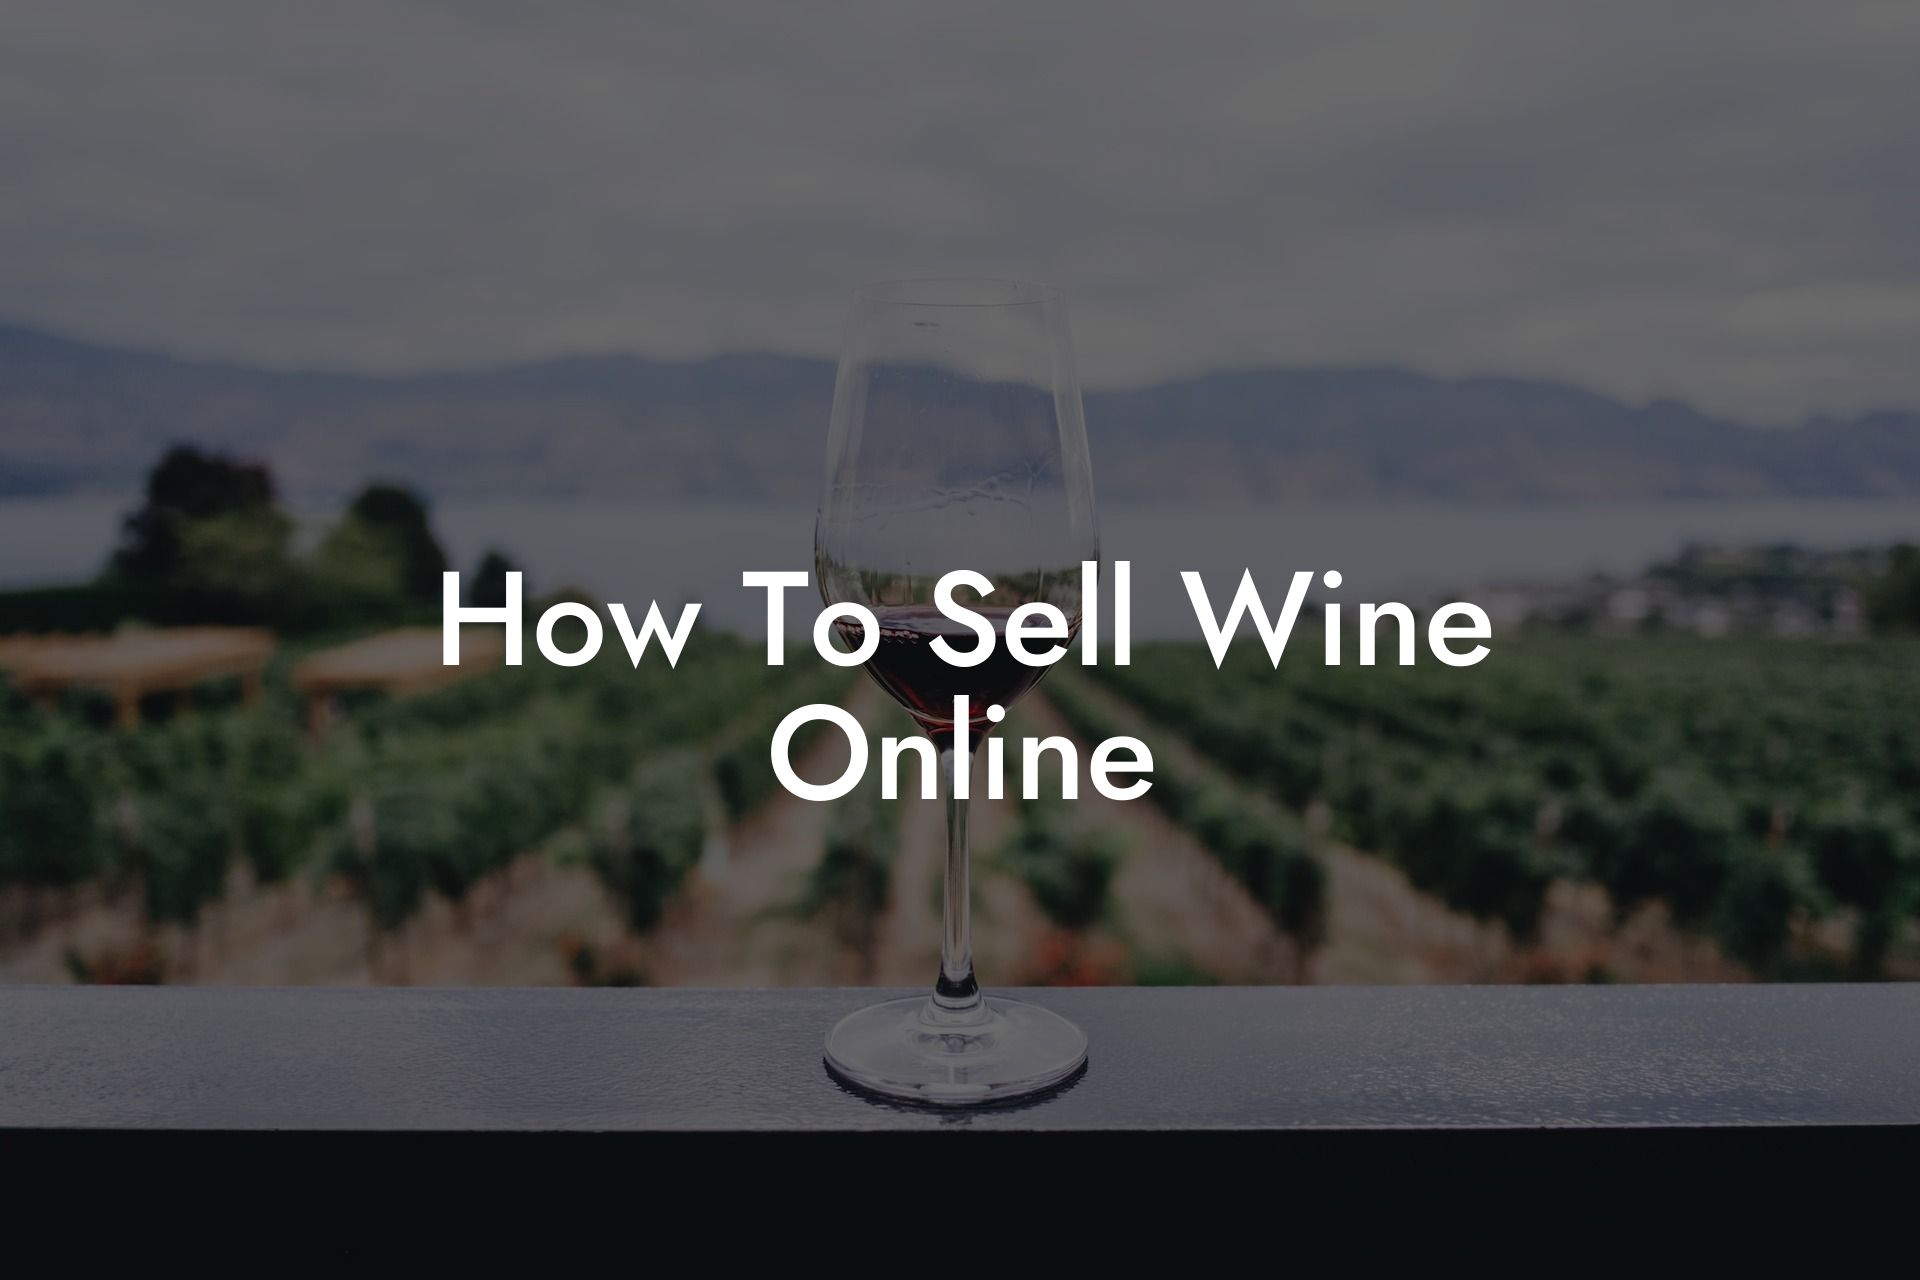 How To Sell Wine Online